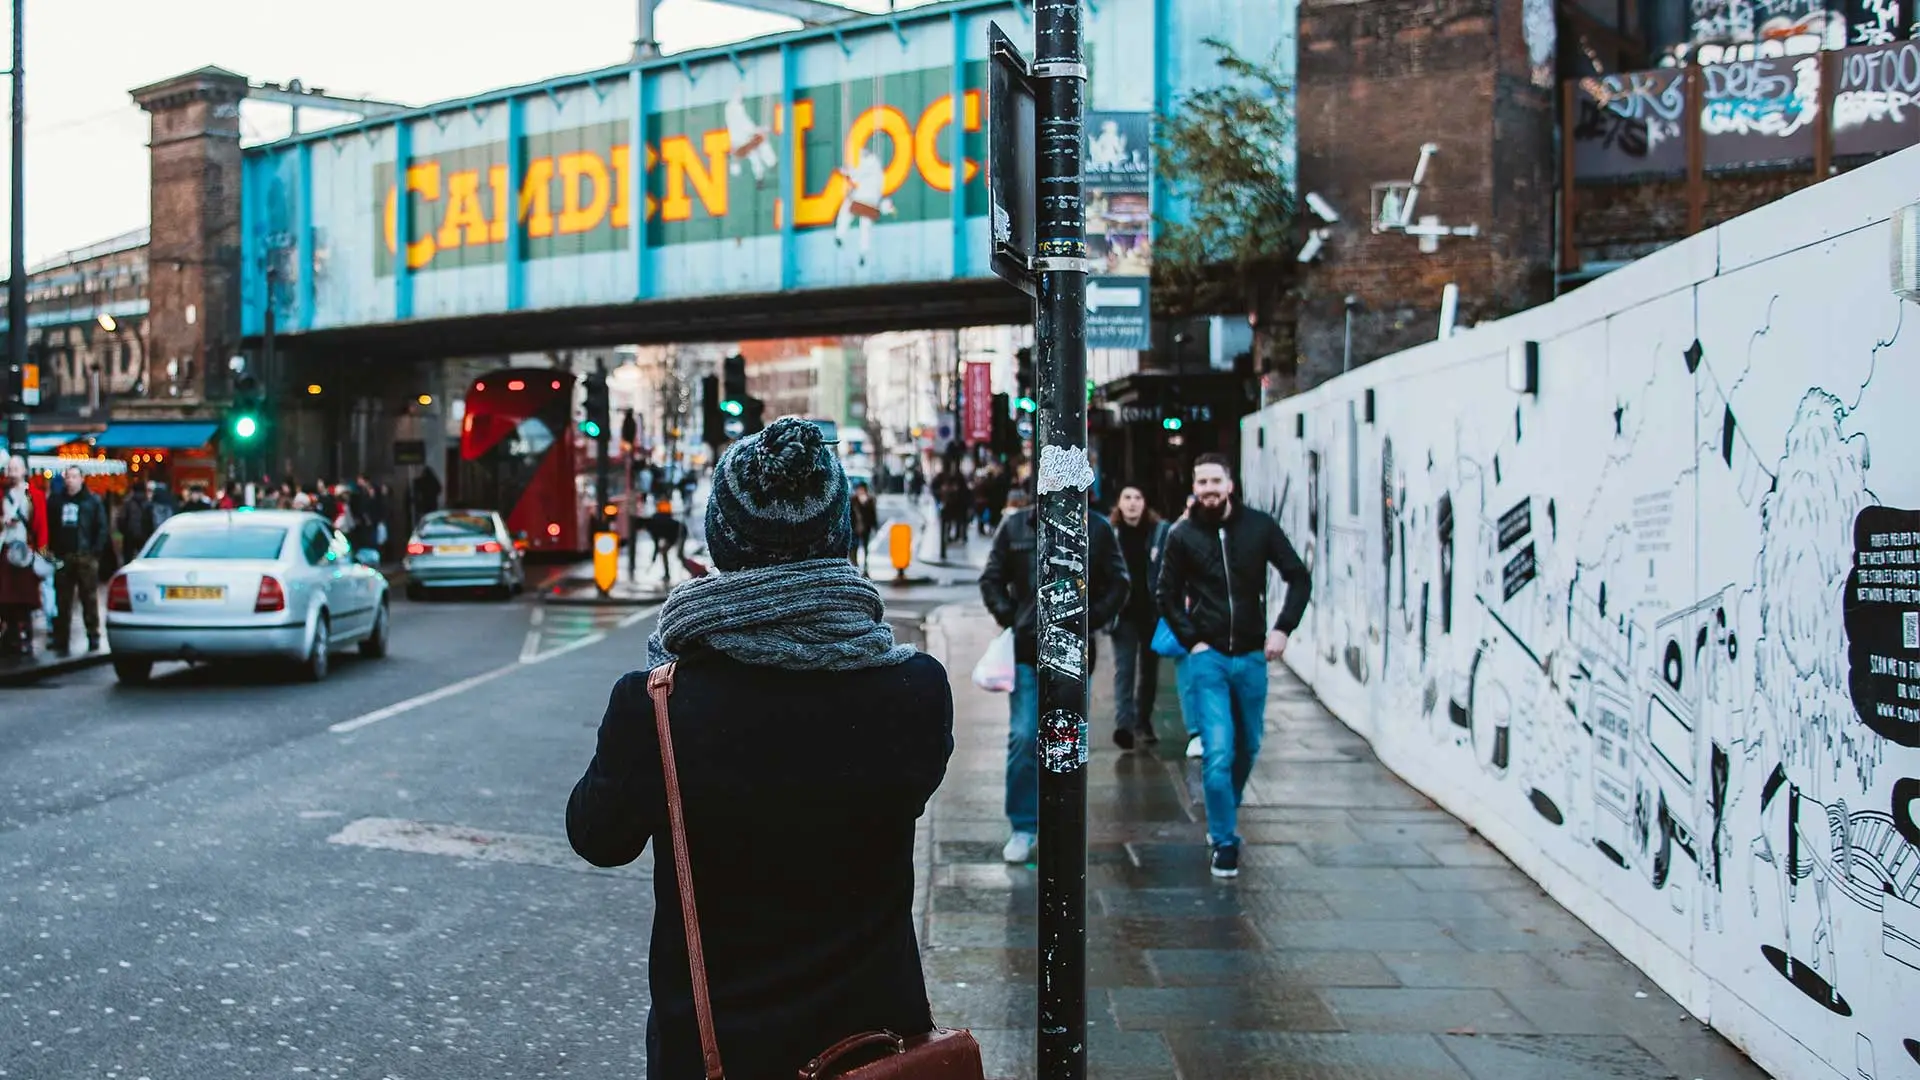 A young man takes a photo in front of Camden Lock - From Clem Onojeghuo via Unsplash